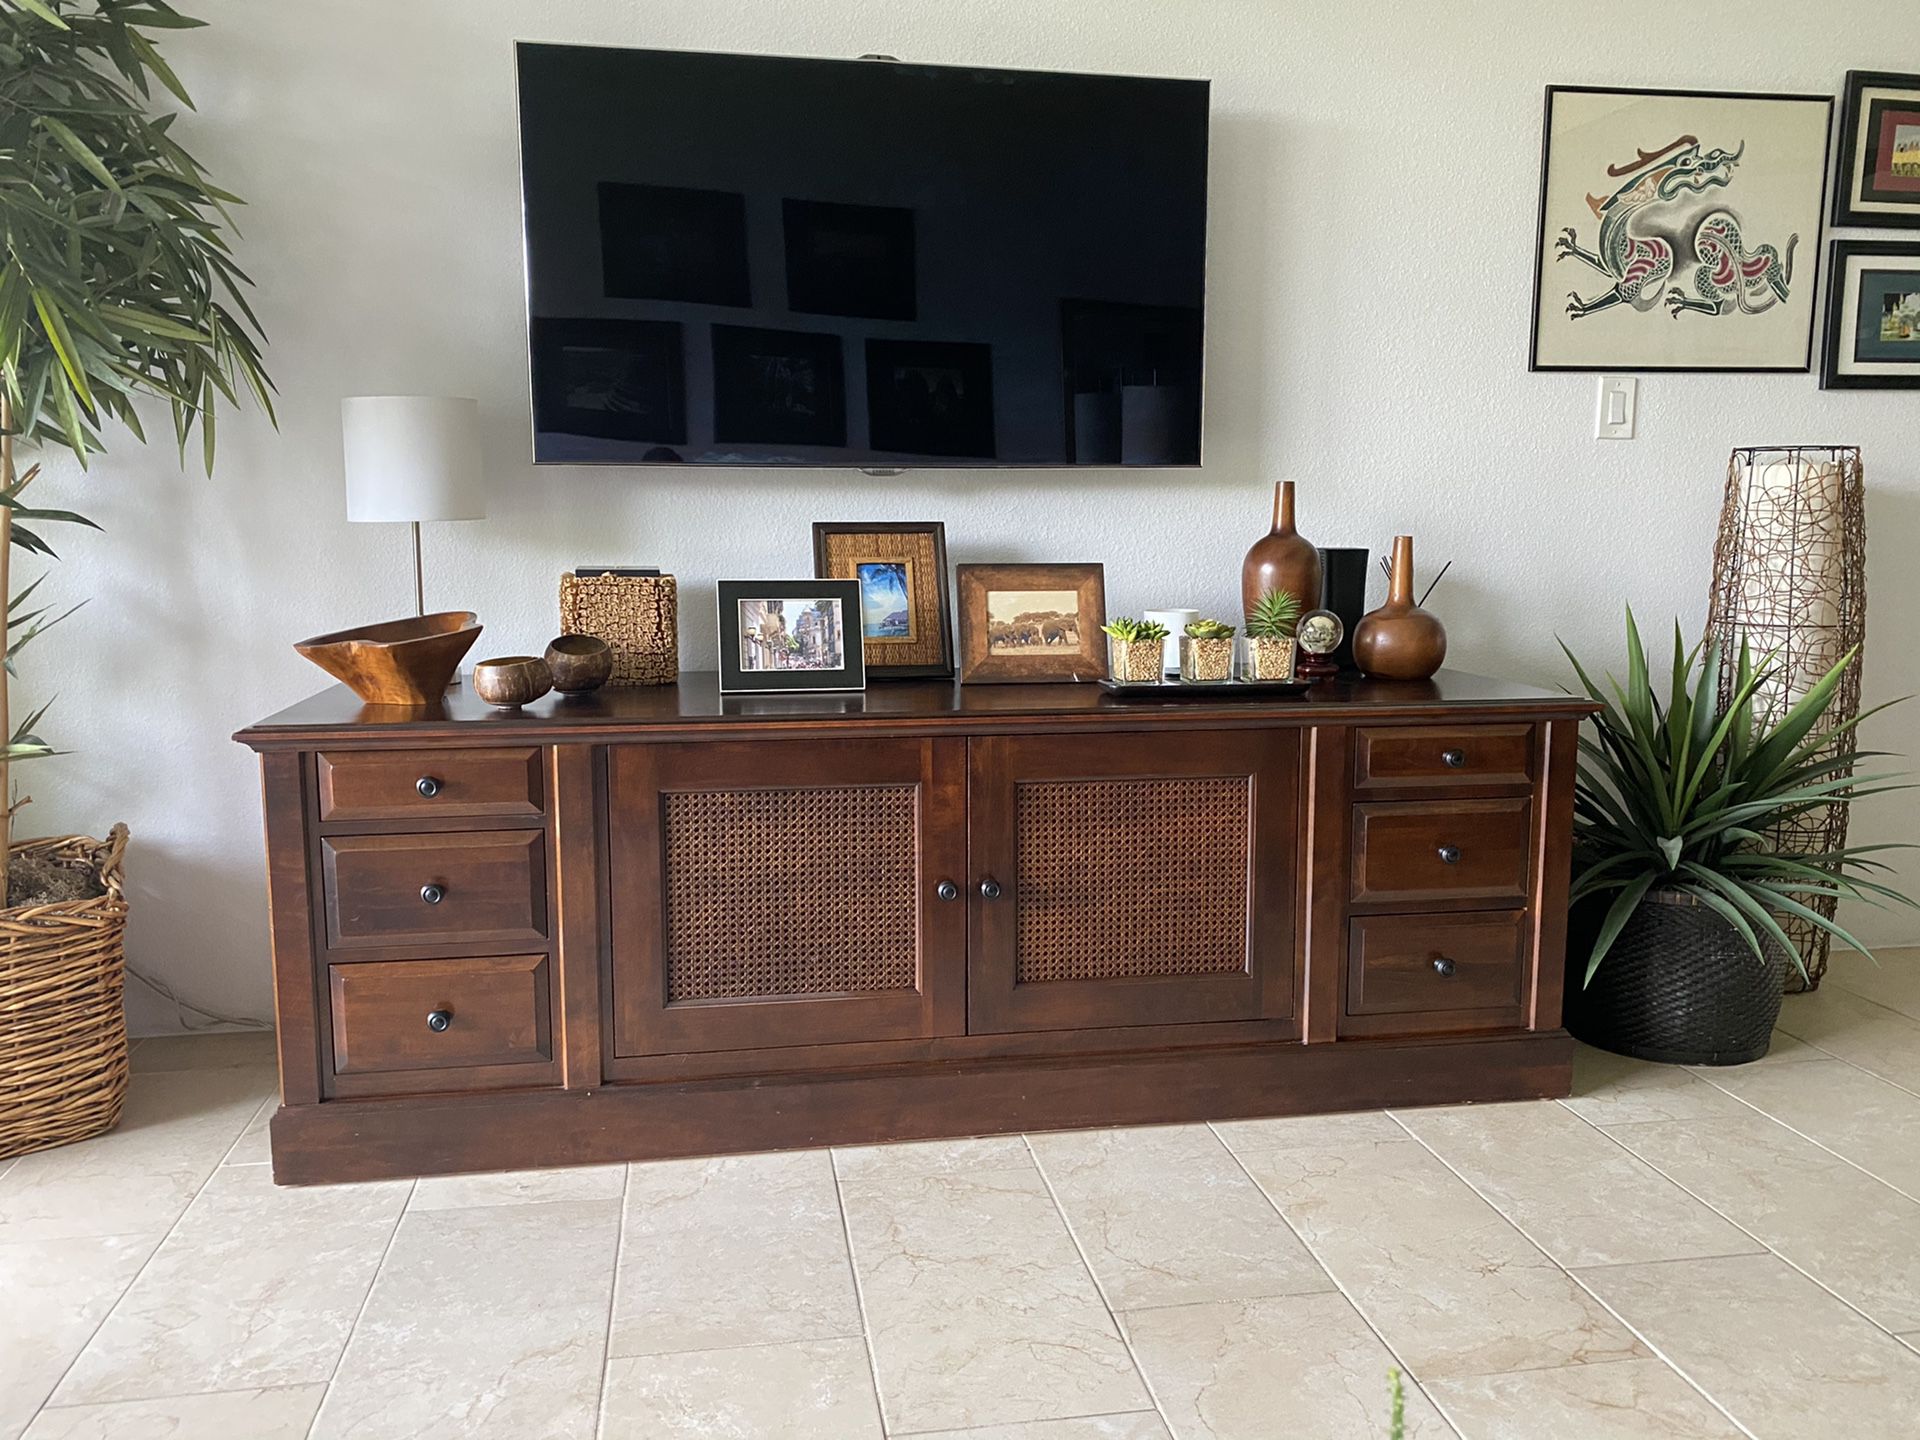 TV/media console Originally from Crate and Barrel